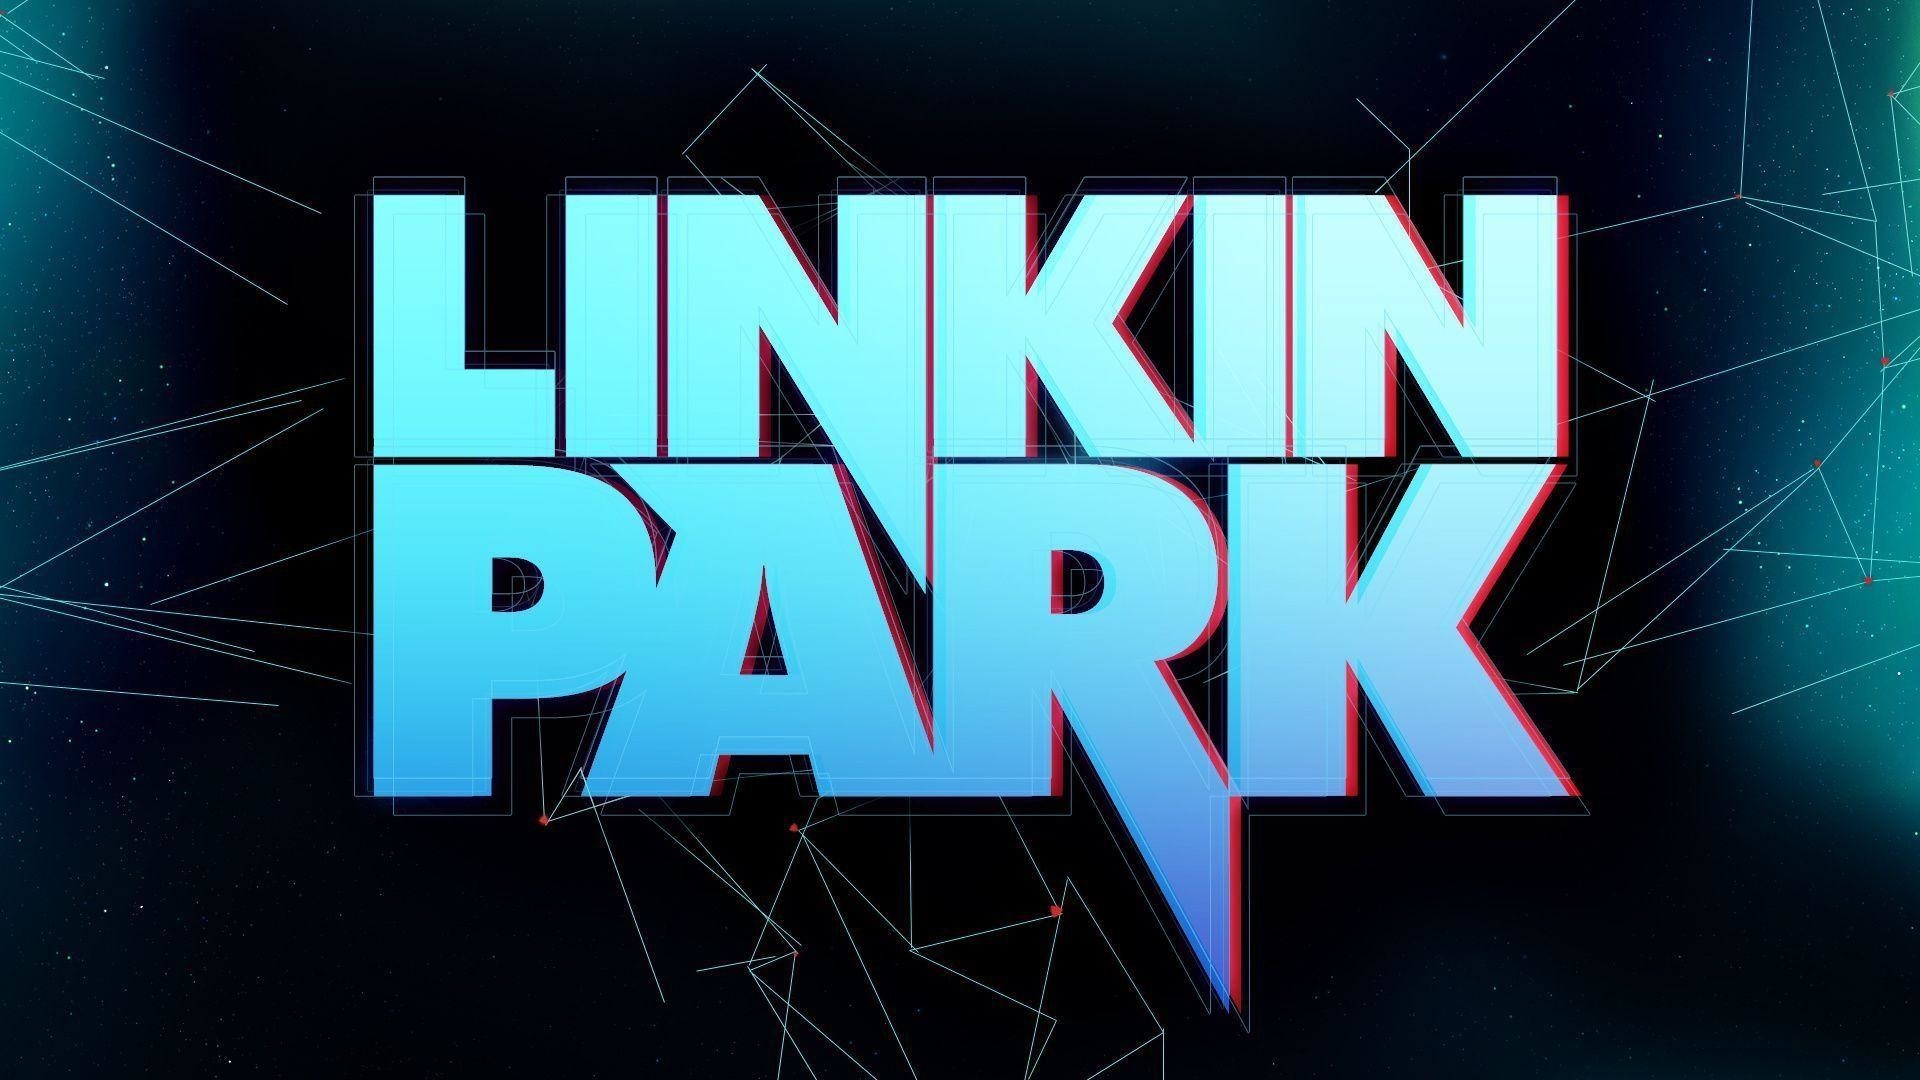 Linkin Park Wallpapers High Resolution And Quality - Linkin Park - HD Wallpaper 